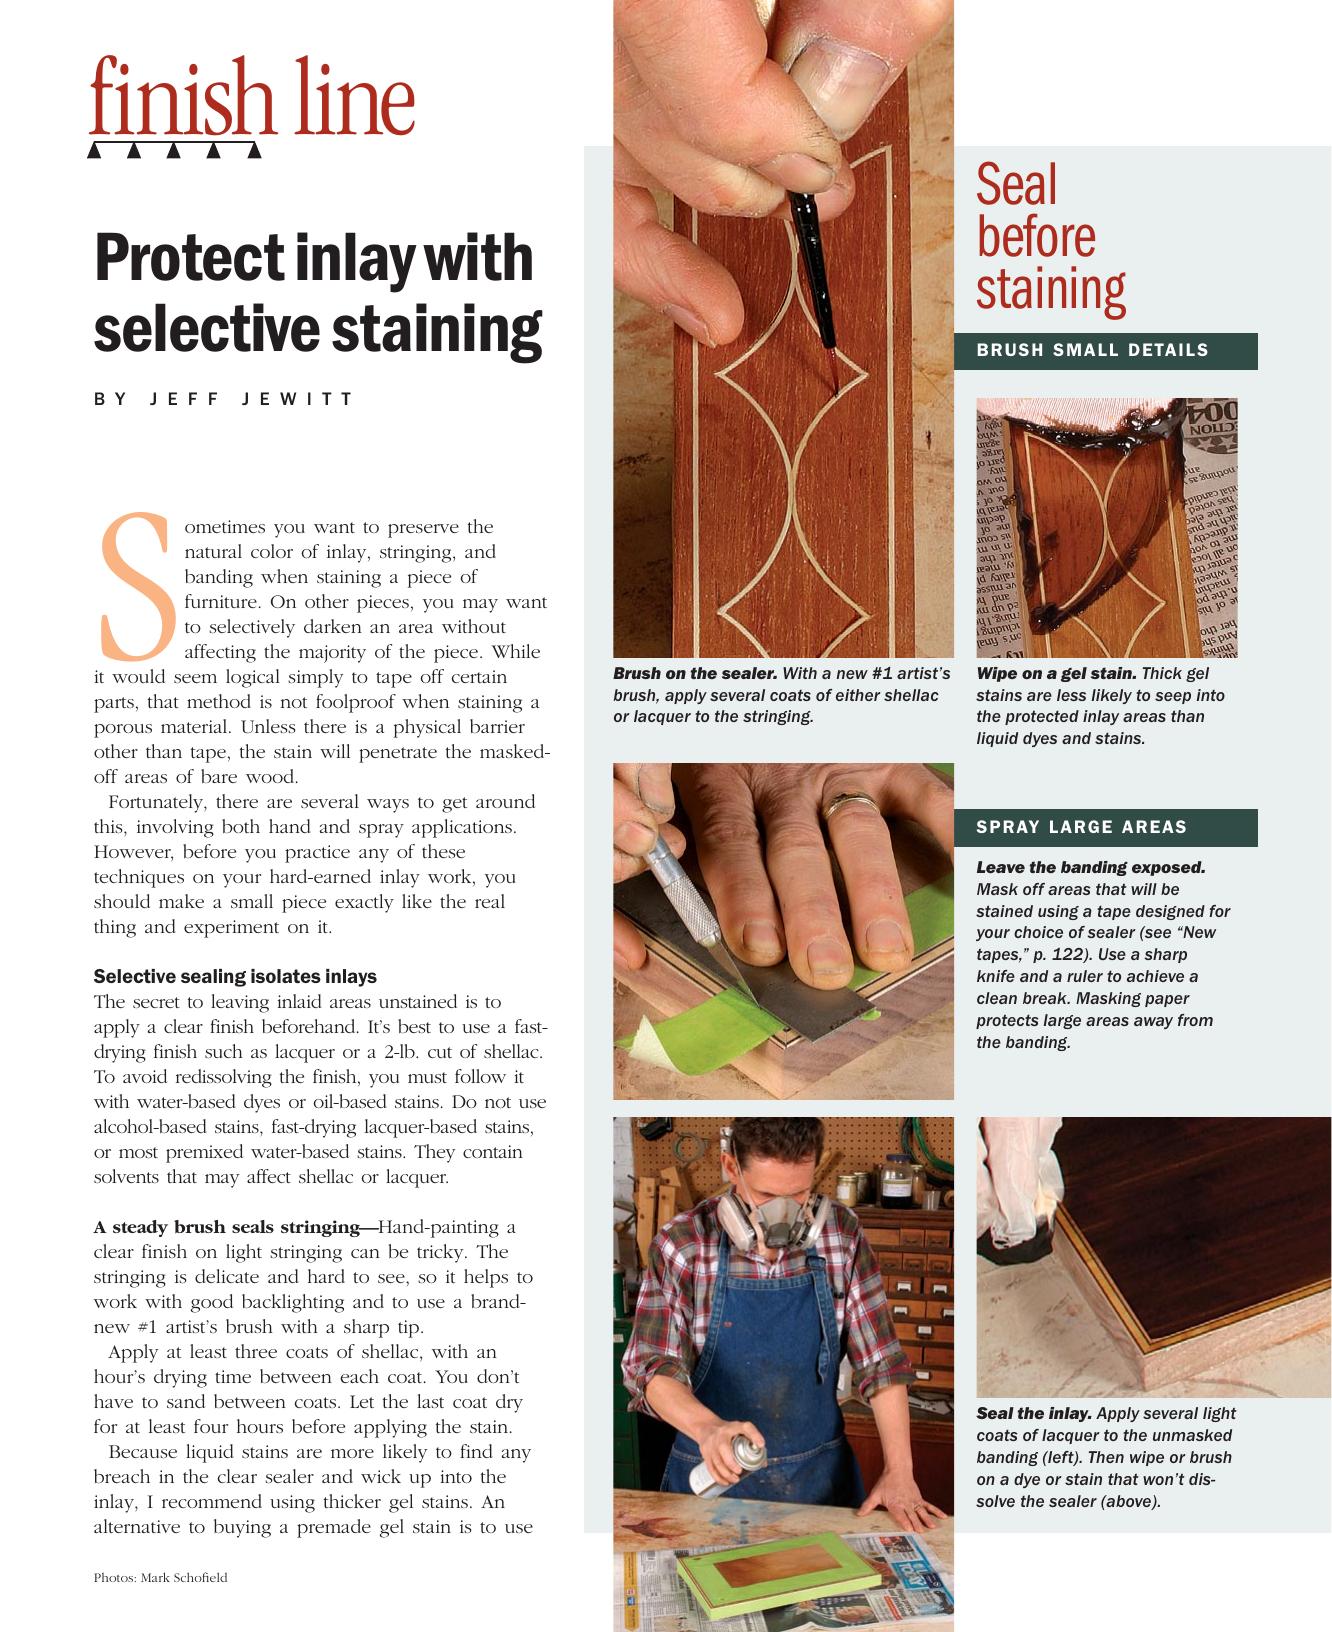 Protect Inlay with Selective Staining by Jeff Jewitt